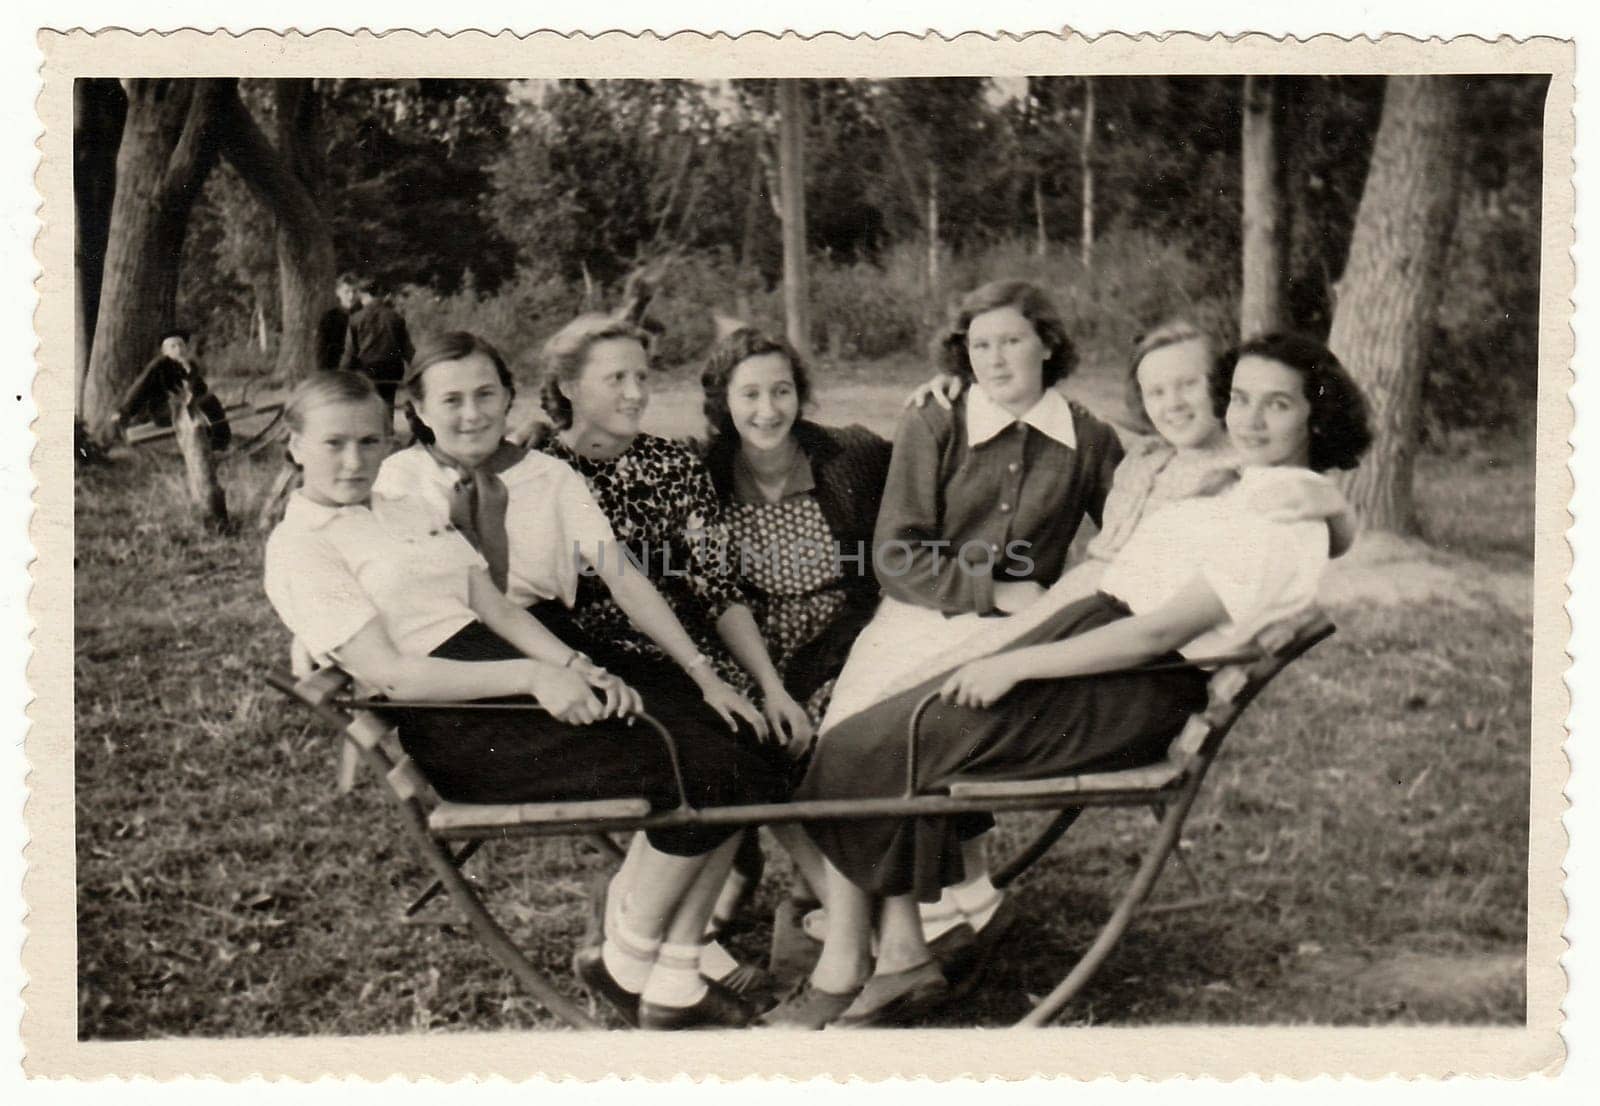 USSR - CIRCA 1950s: Vintage photo shows girls sit on swing